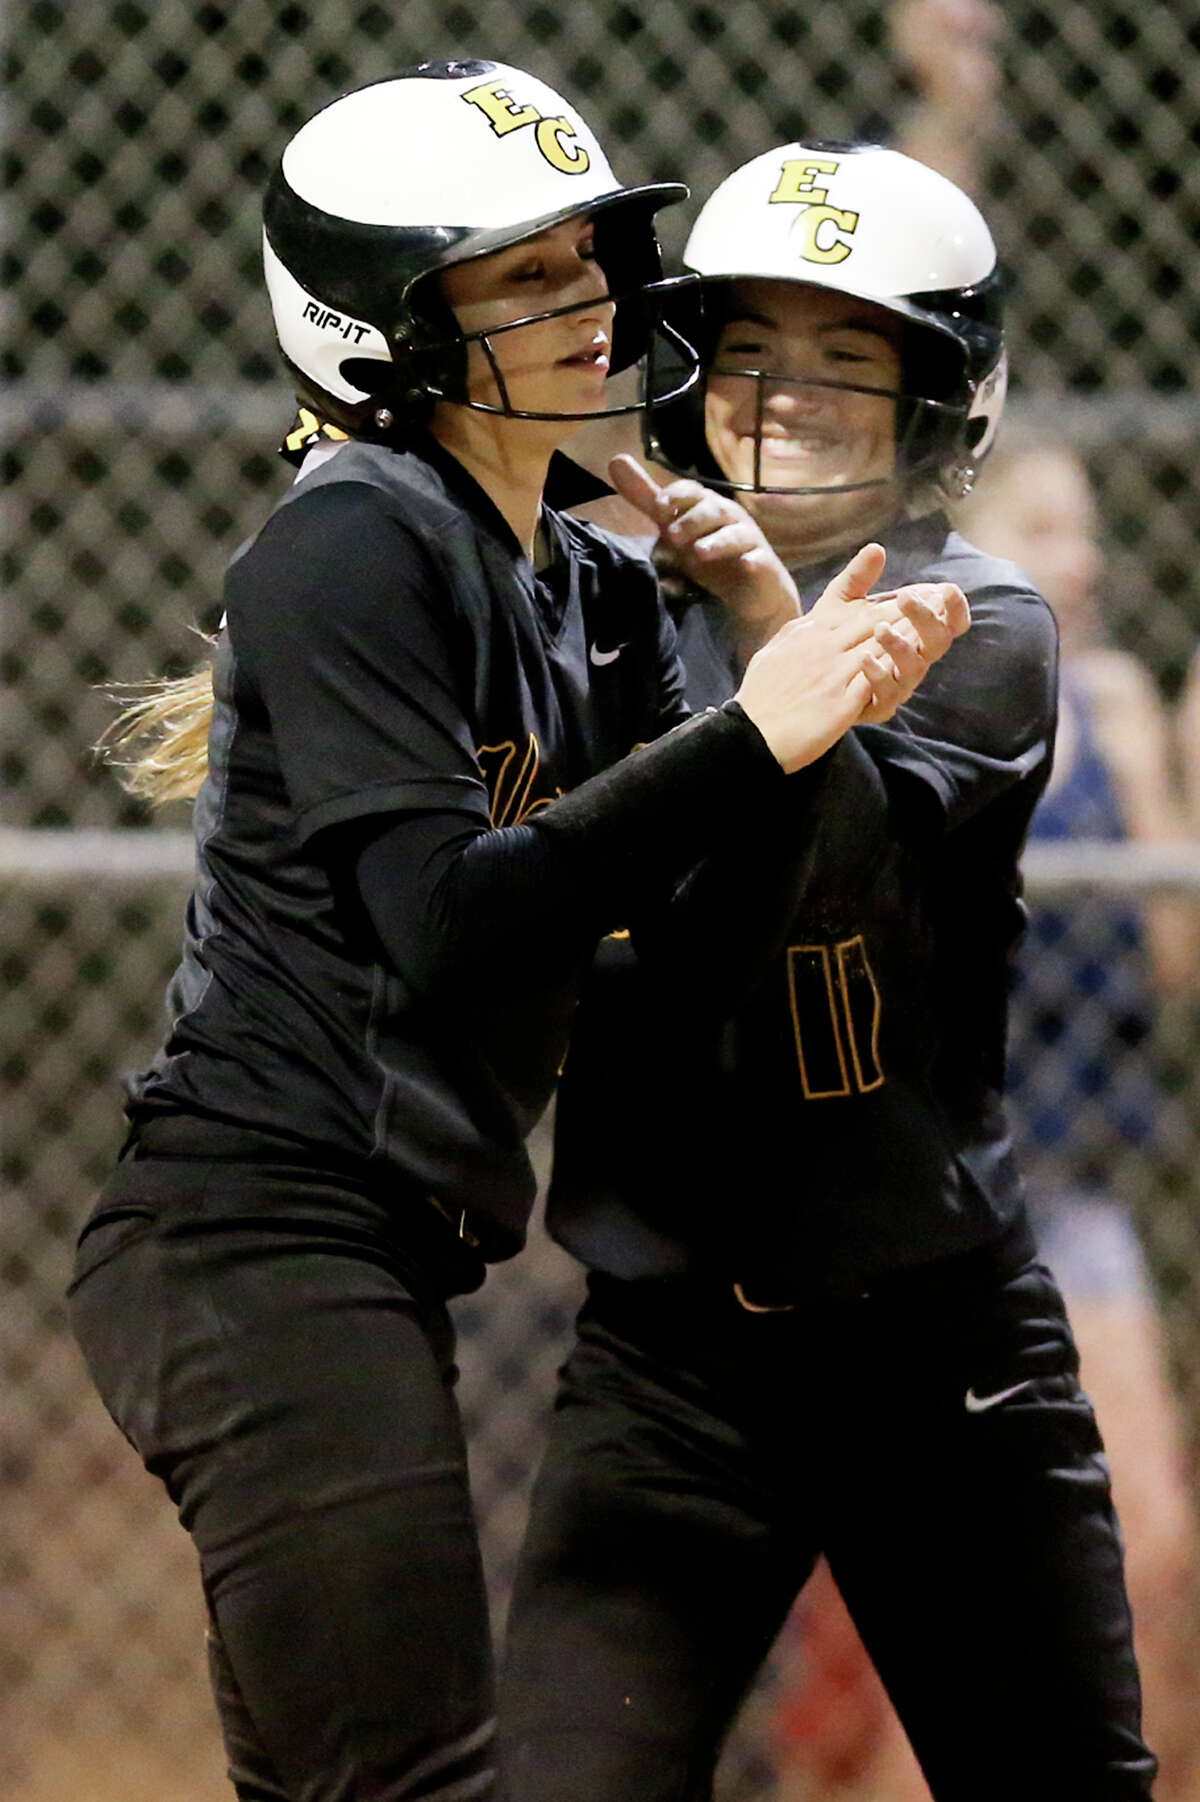 East Central's Cara Johnson (right) celebrates with Kendall Talley after the pair scored in the fifth inning of their District 28-6A softball game at East Central on Tuesday, March 24, 2015. East Central beat Southwest 4-2. MARVIN PFEIFFER/ mpfeiffer@express-news.net